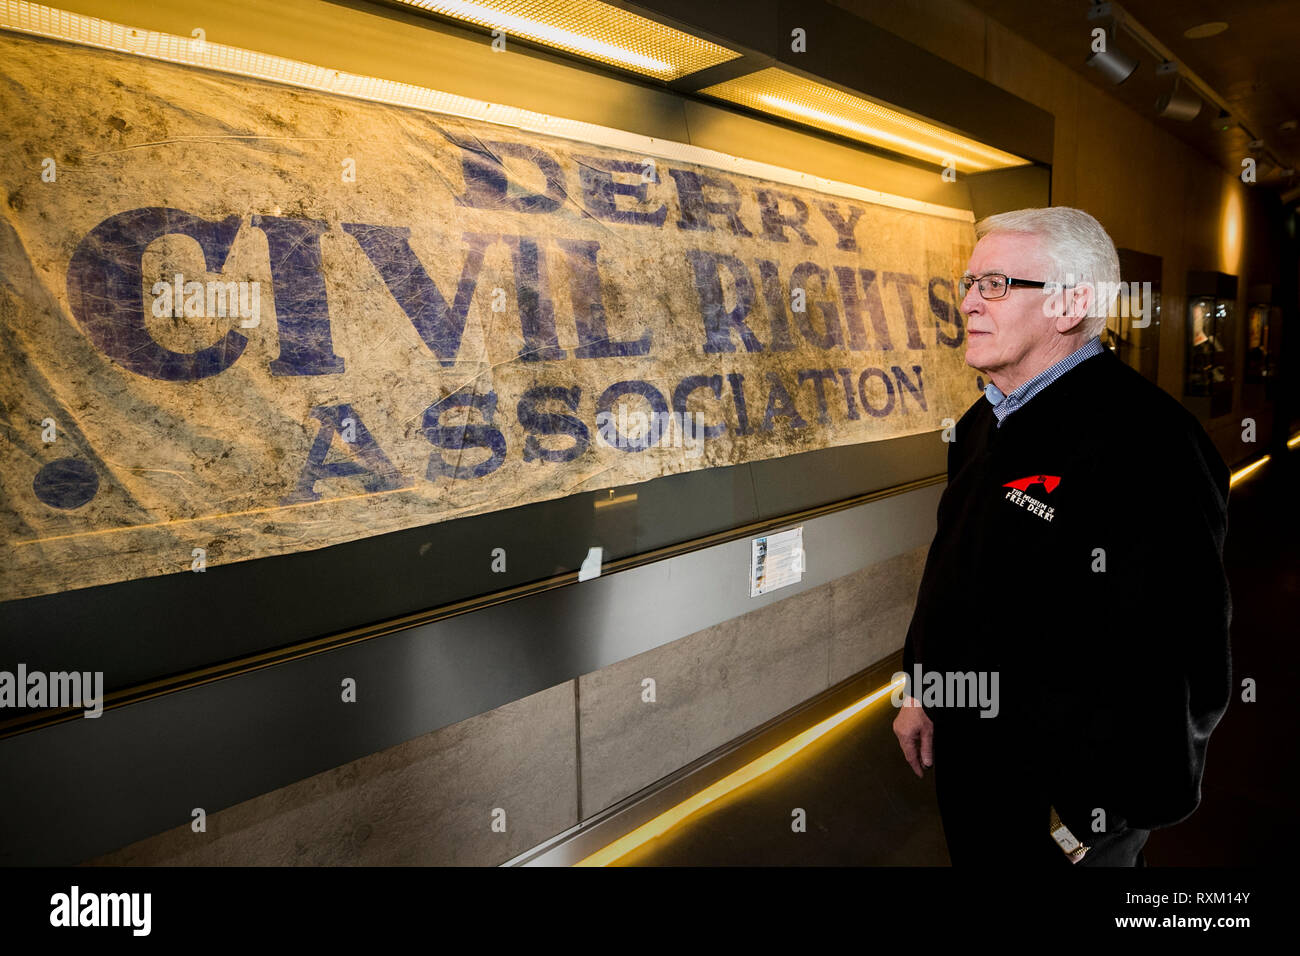 John Kelly whose 17 year old brother, Michael, was killed during Bloody Sunday stands beside the Derry Civil Rights Association banner in The Museum of Free Derry that was carried on the day which is known as Bloody Sunday. The Public Prosecution Service is expected to announce whether it will pursue prosecutions against soldiers over the deaths of 13 people in Londonderry on January 30 1972. Stock Photo